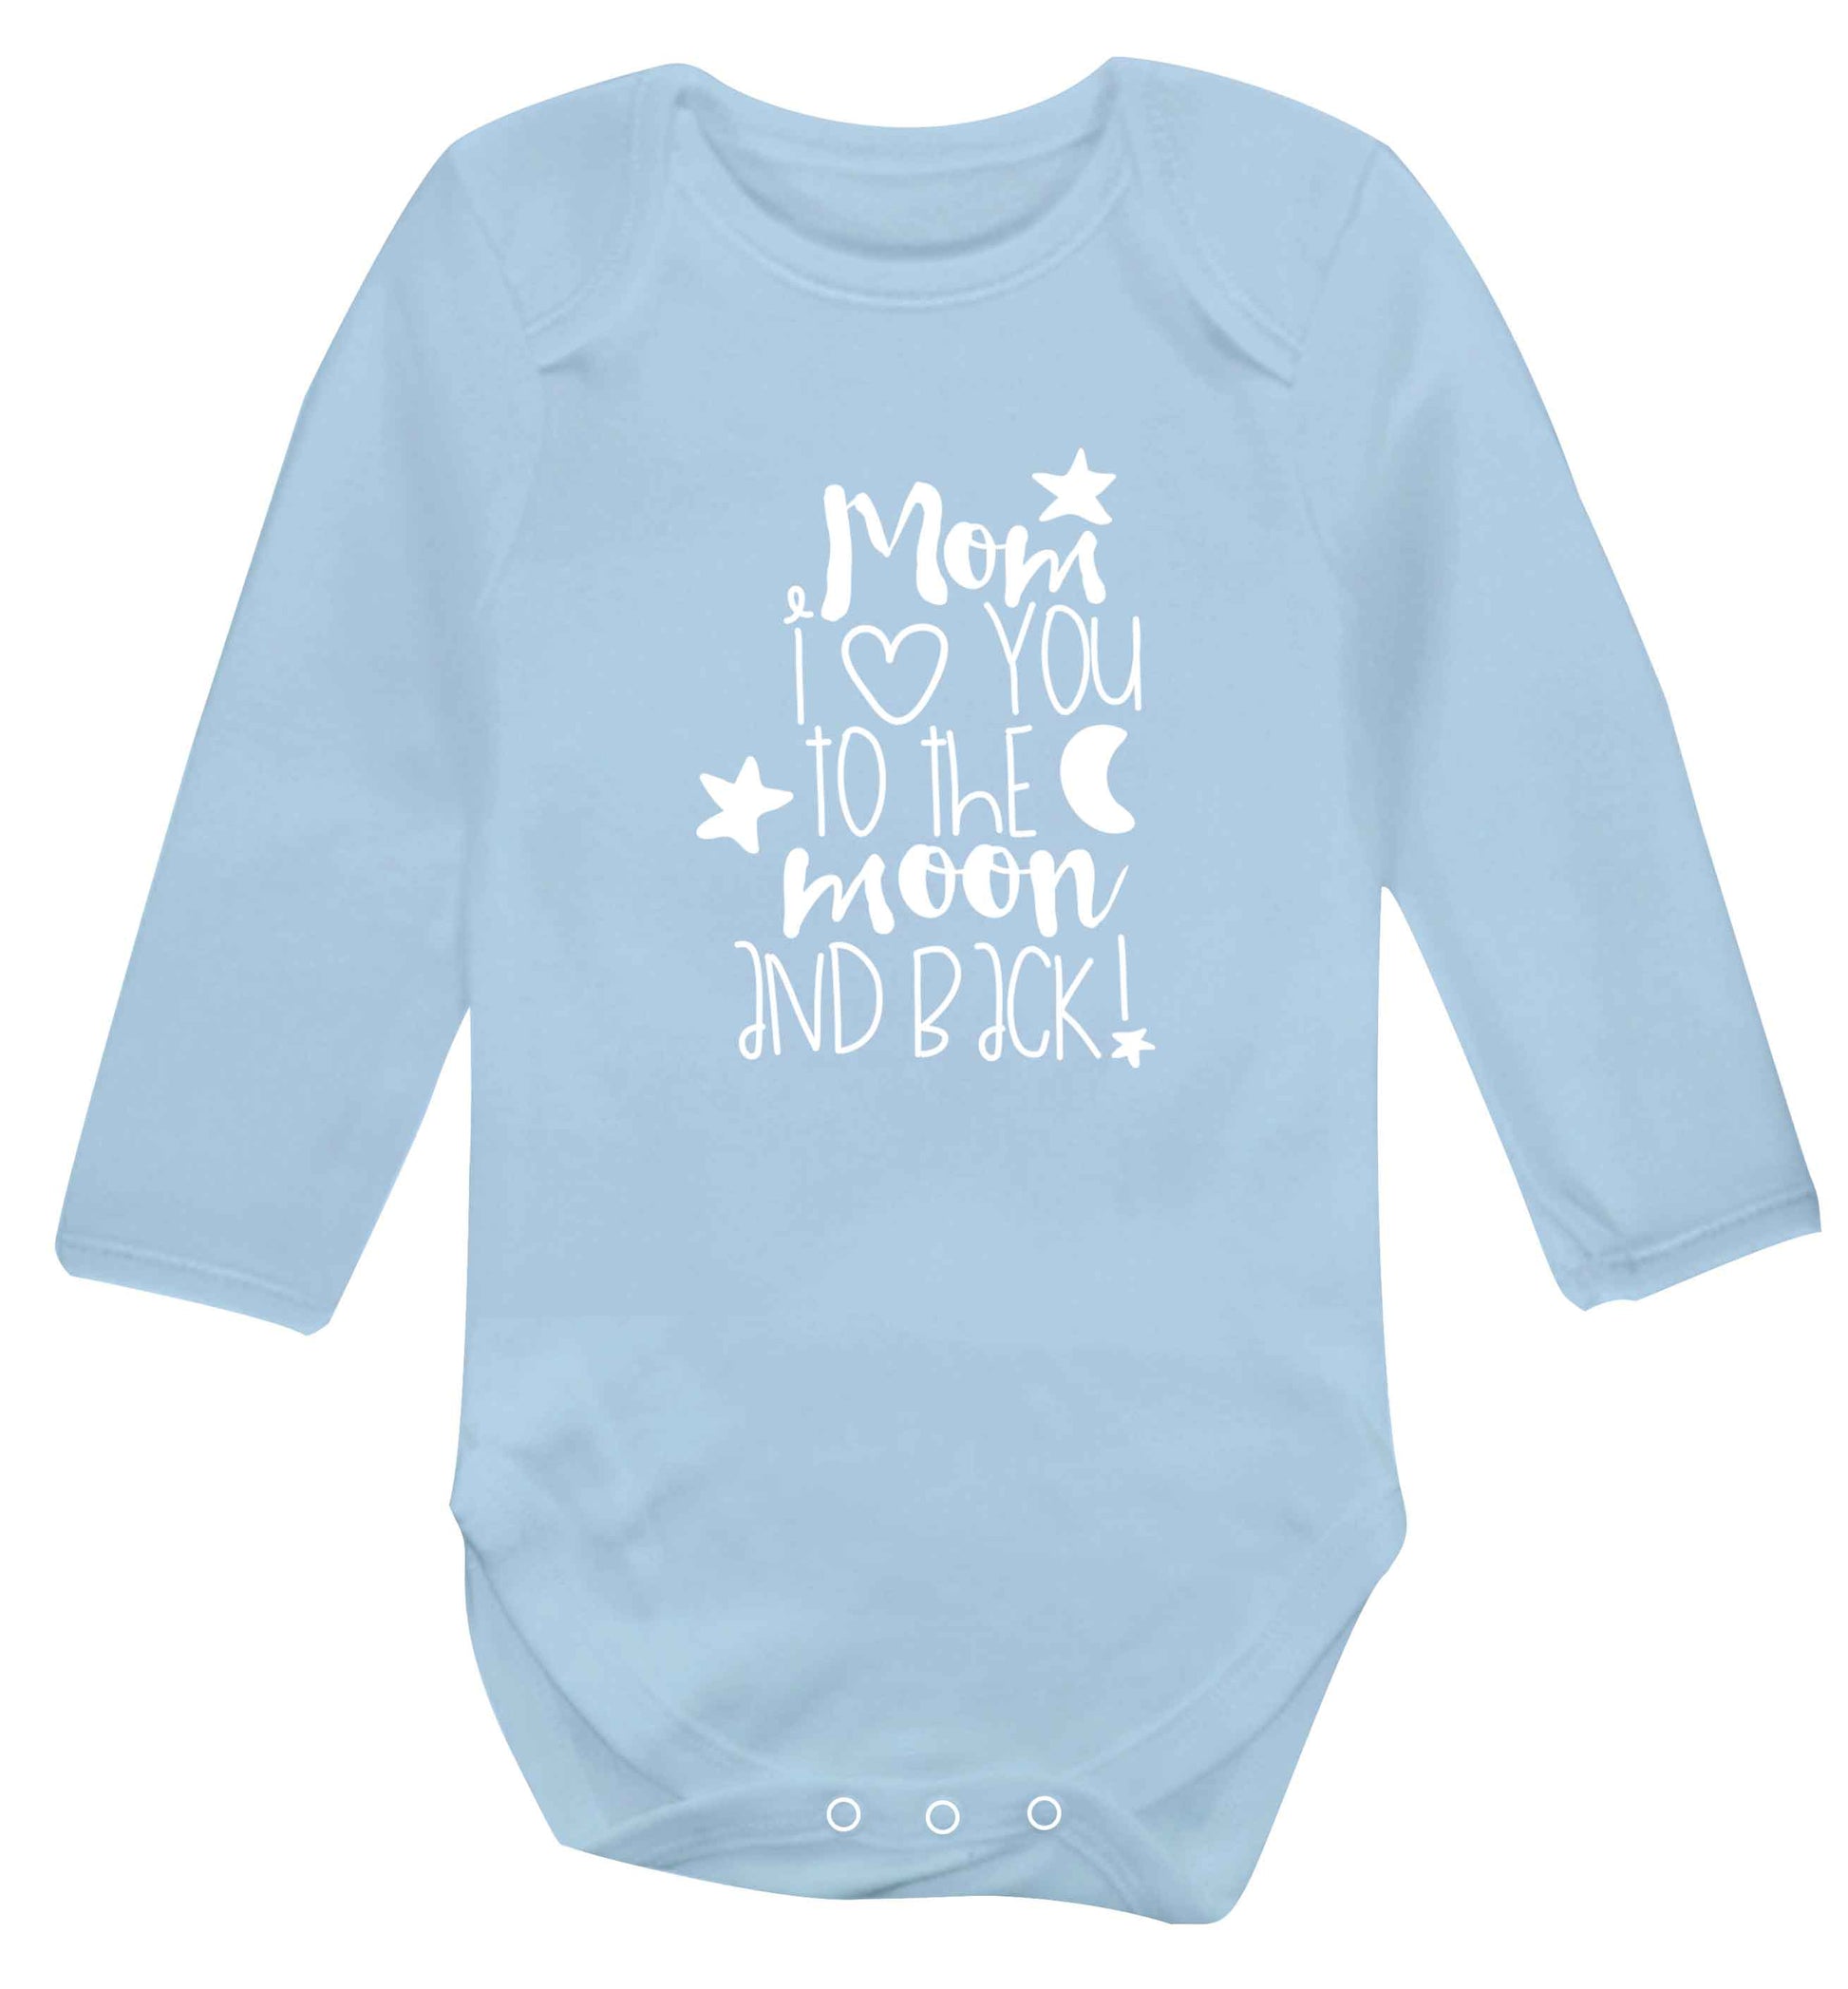 Mom I love you to the moon and back baby vest long sleeved pale blue 6-12 months